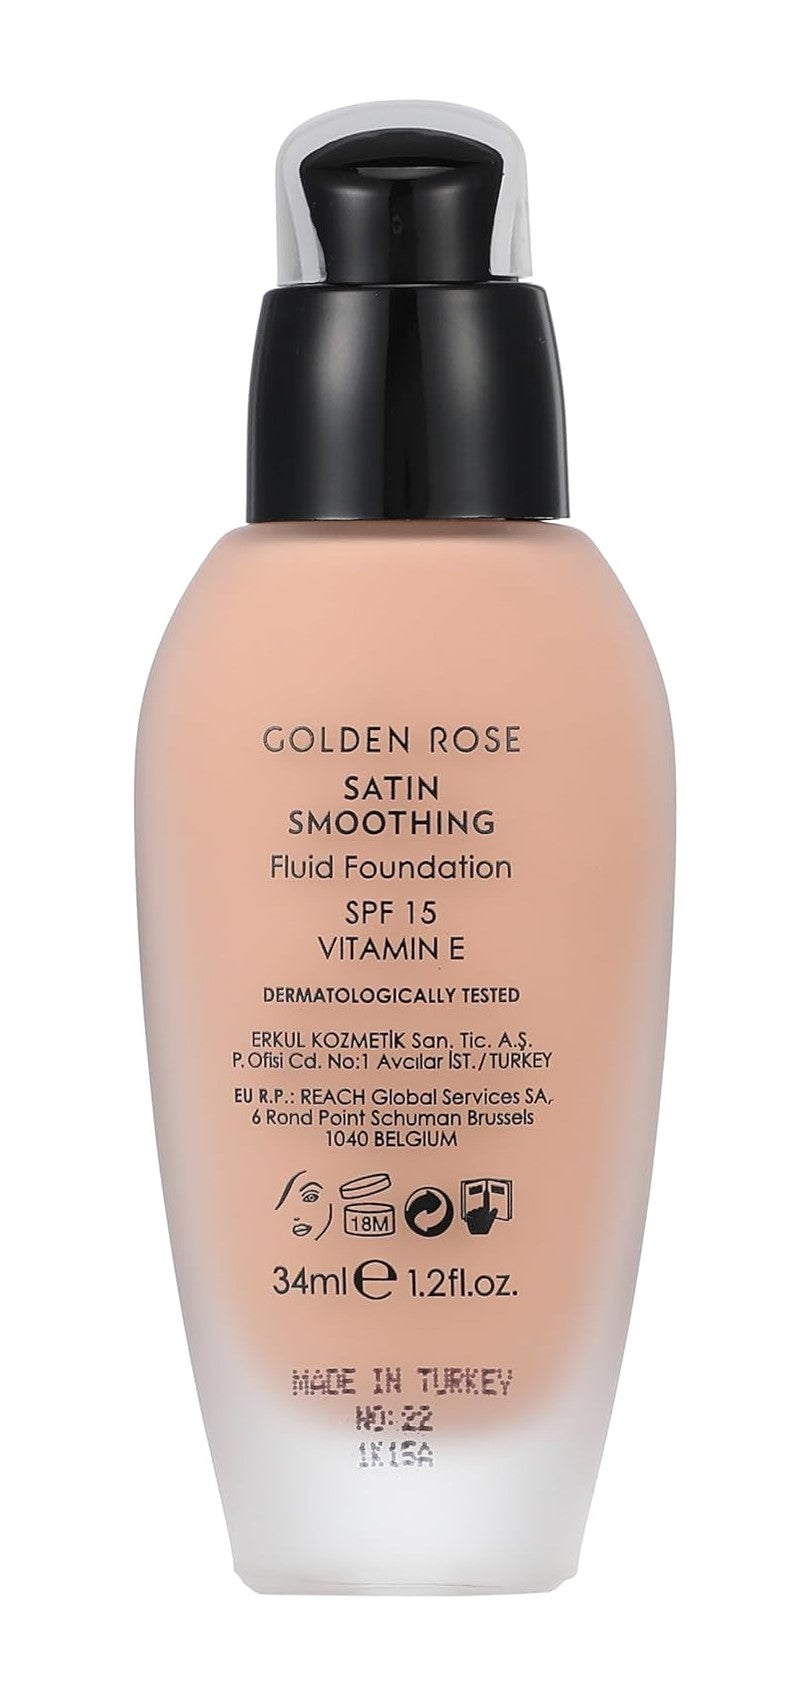 Golden Rose satin smoothing fluid foundation review 